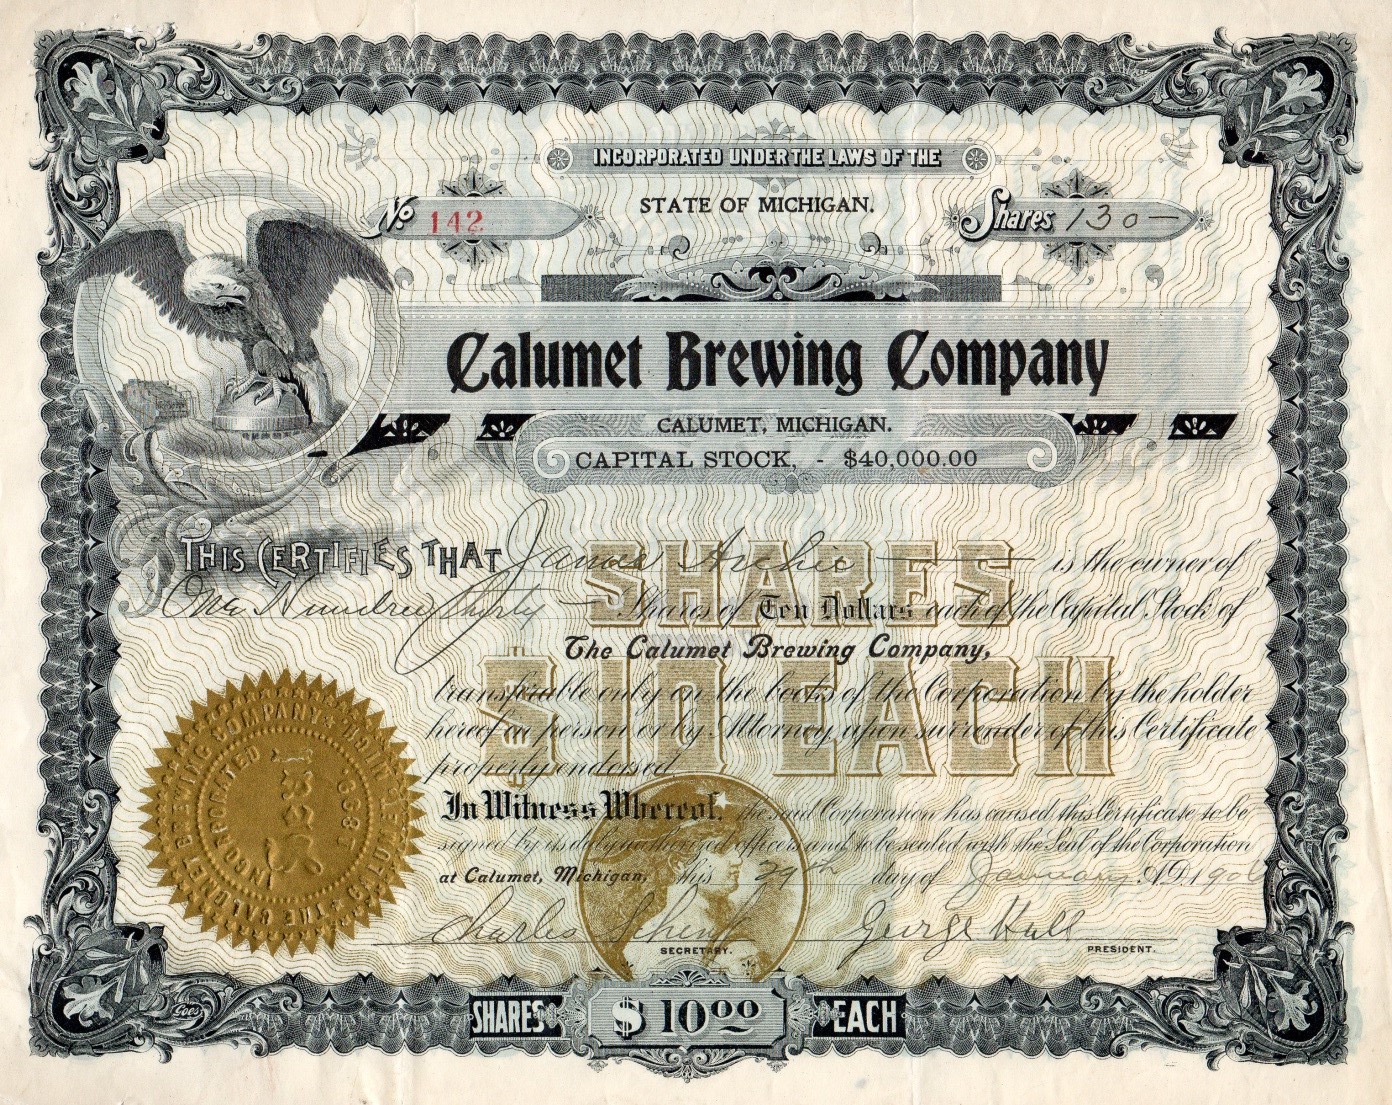 Calumet Brewing Co. Stock Certificate - 1906<br>Courtesy of the Richard Dana Collection